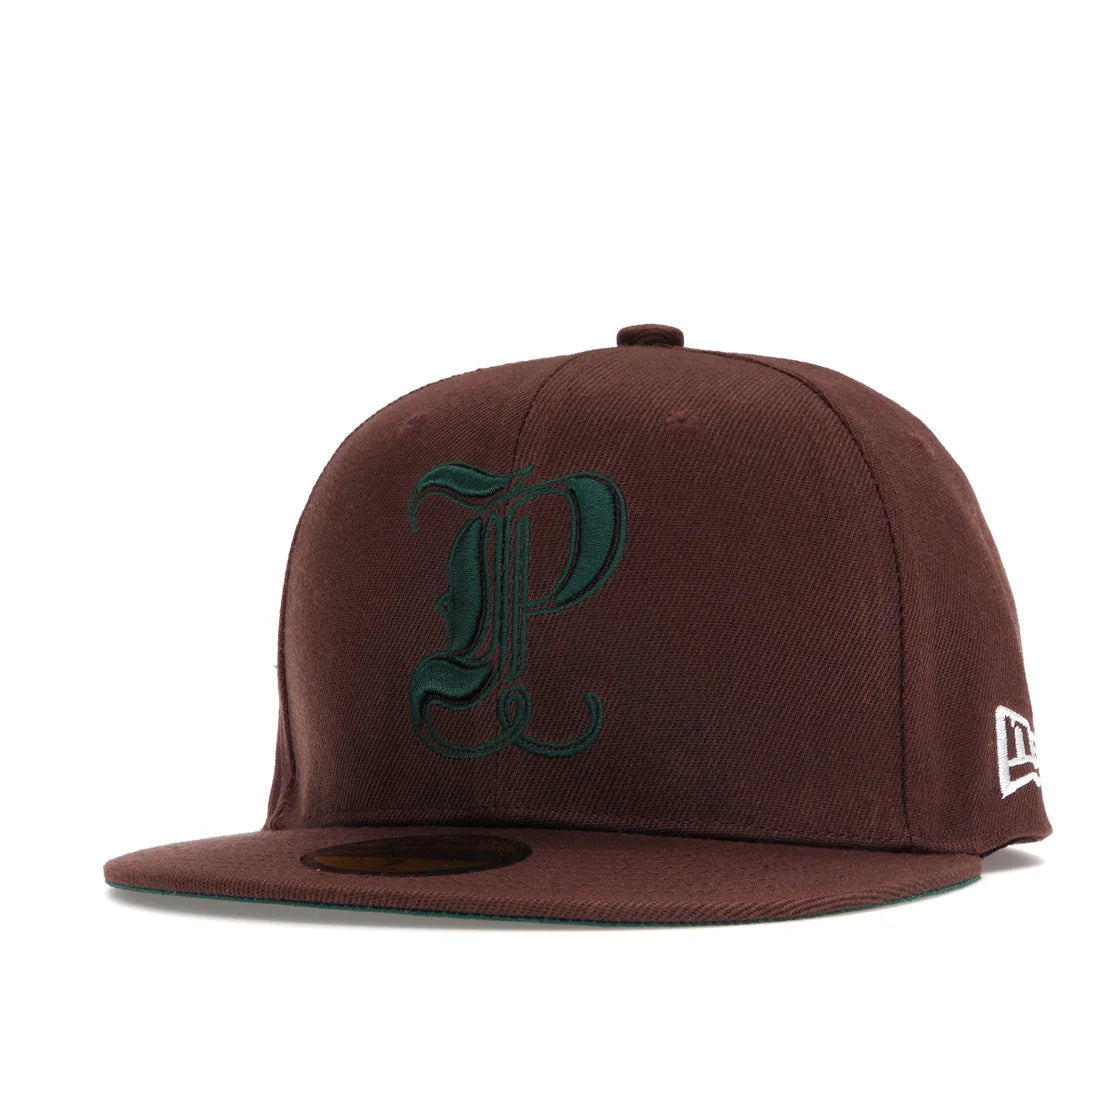 TFP World Series Fitted Cap (Brown)